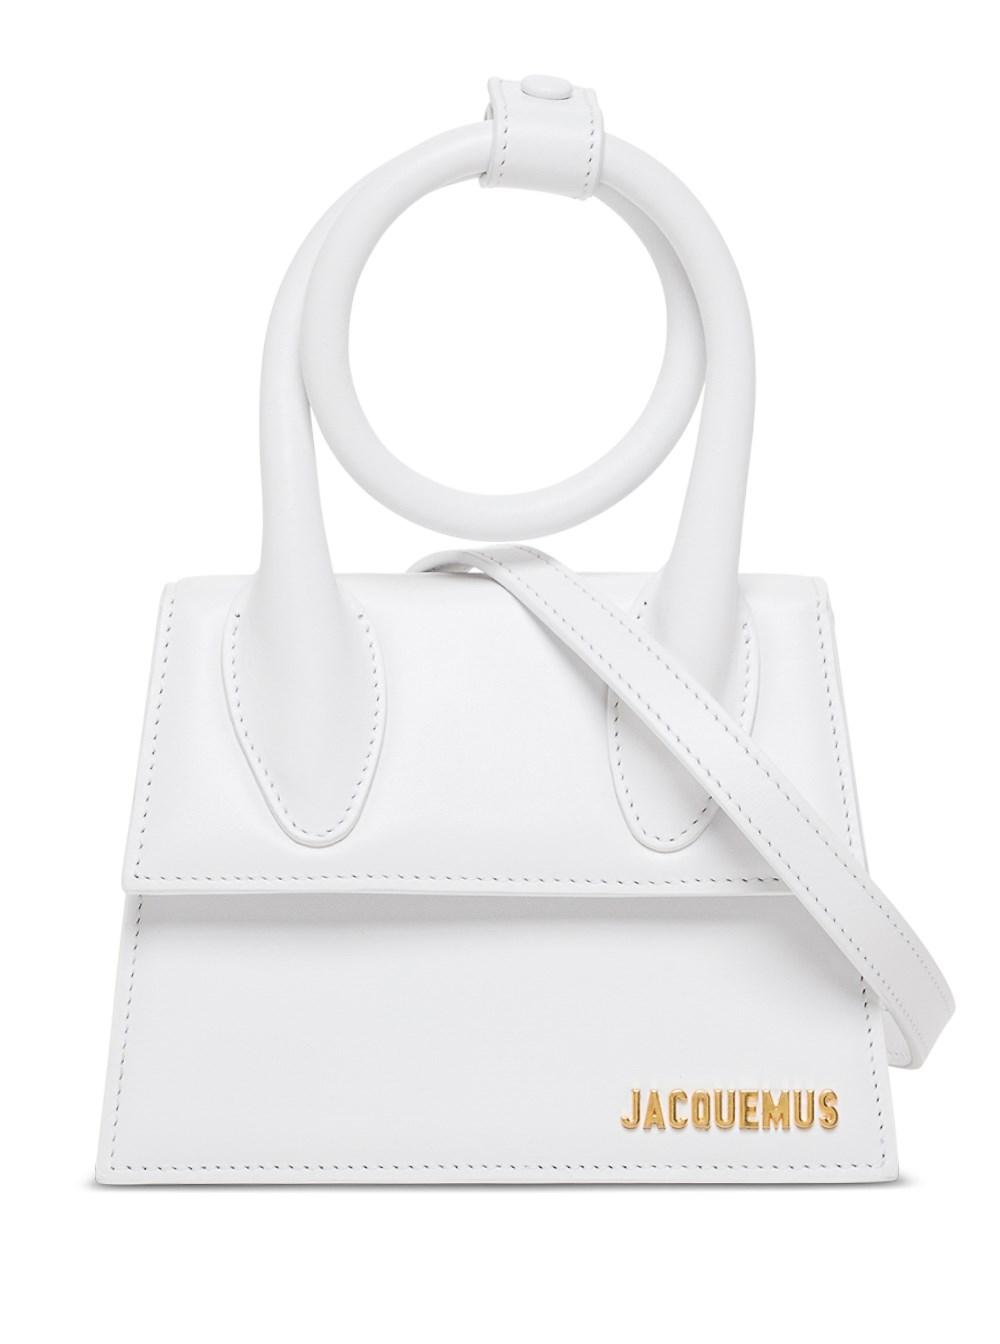 Jacquemus Le Chiquito Noeud Handbag In White Leather - Lyst